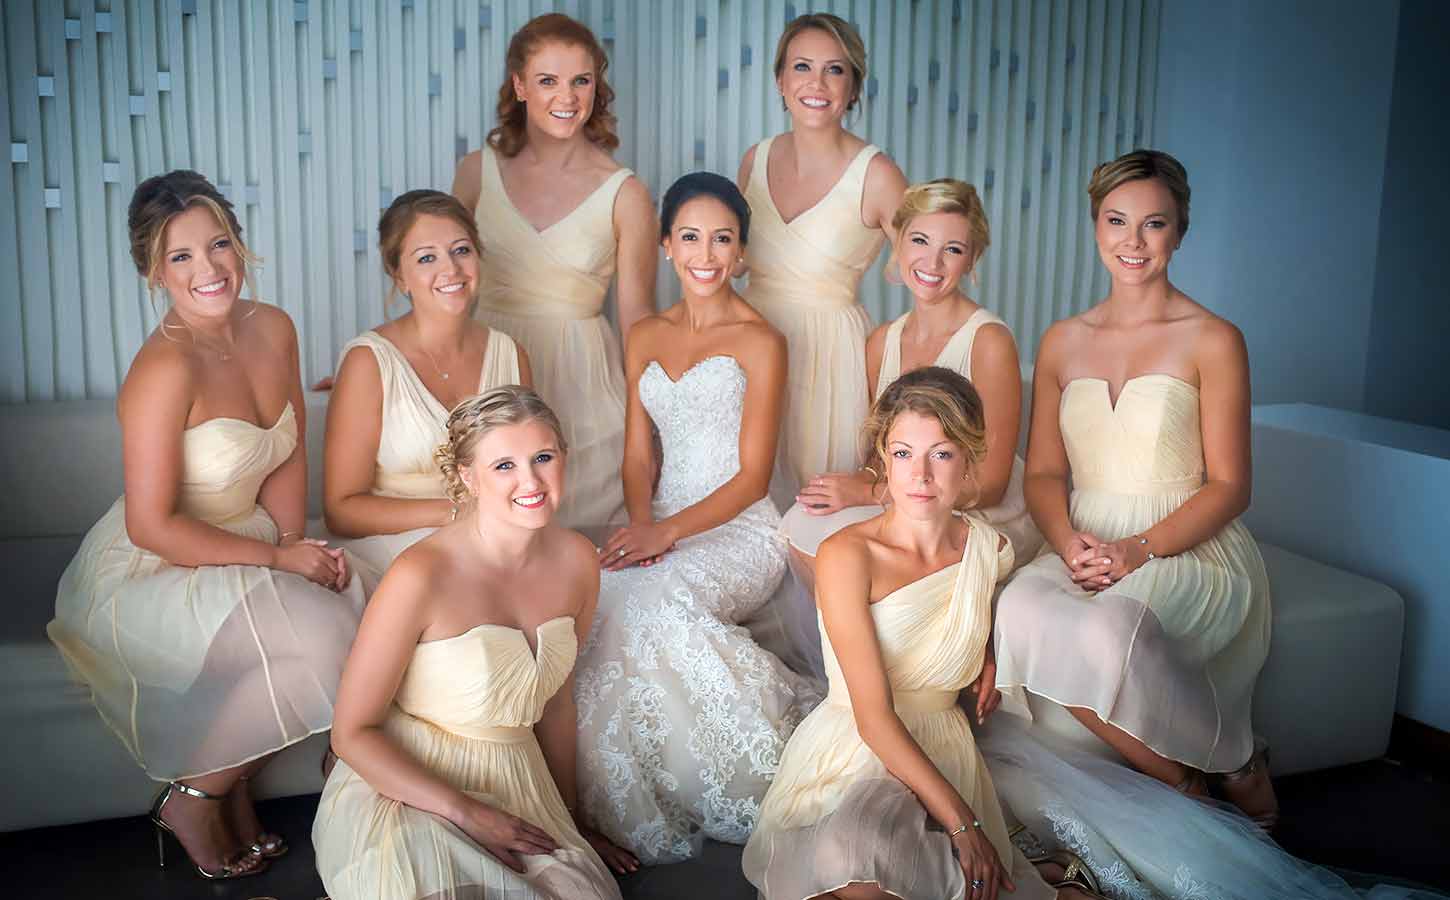 a beutiful bride with her friends posing